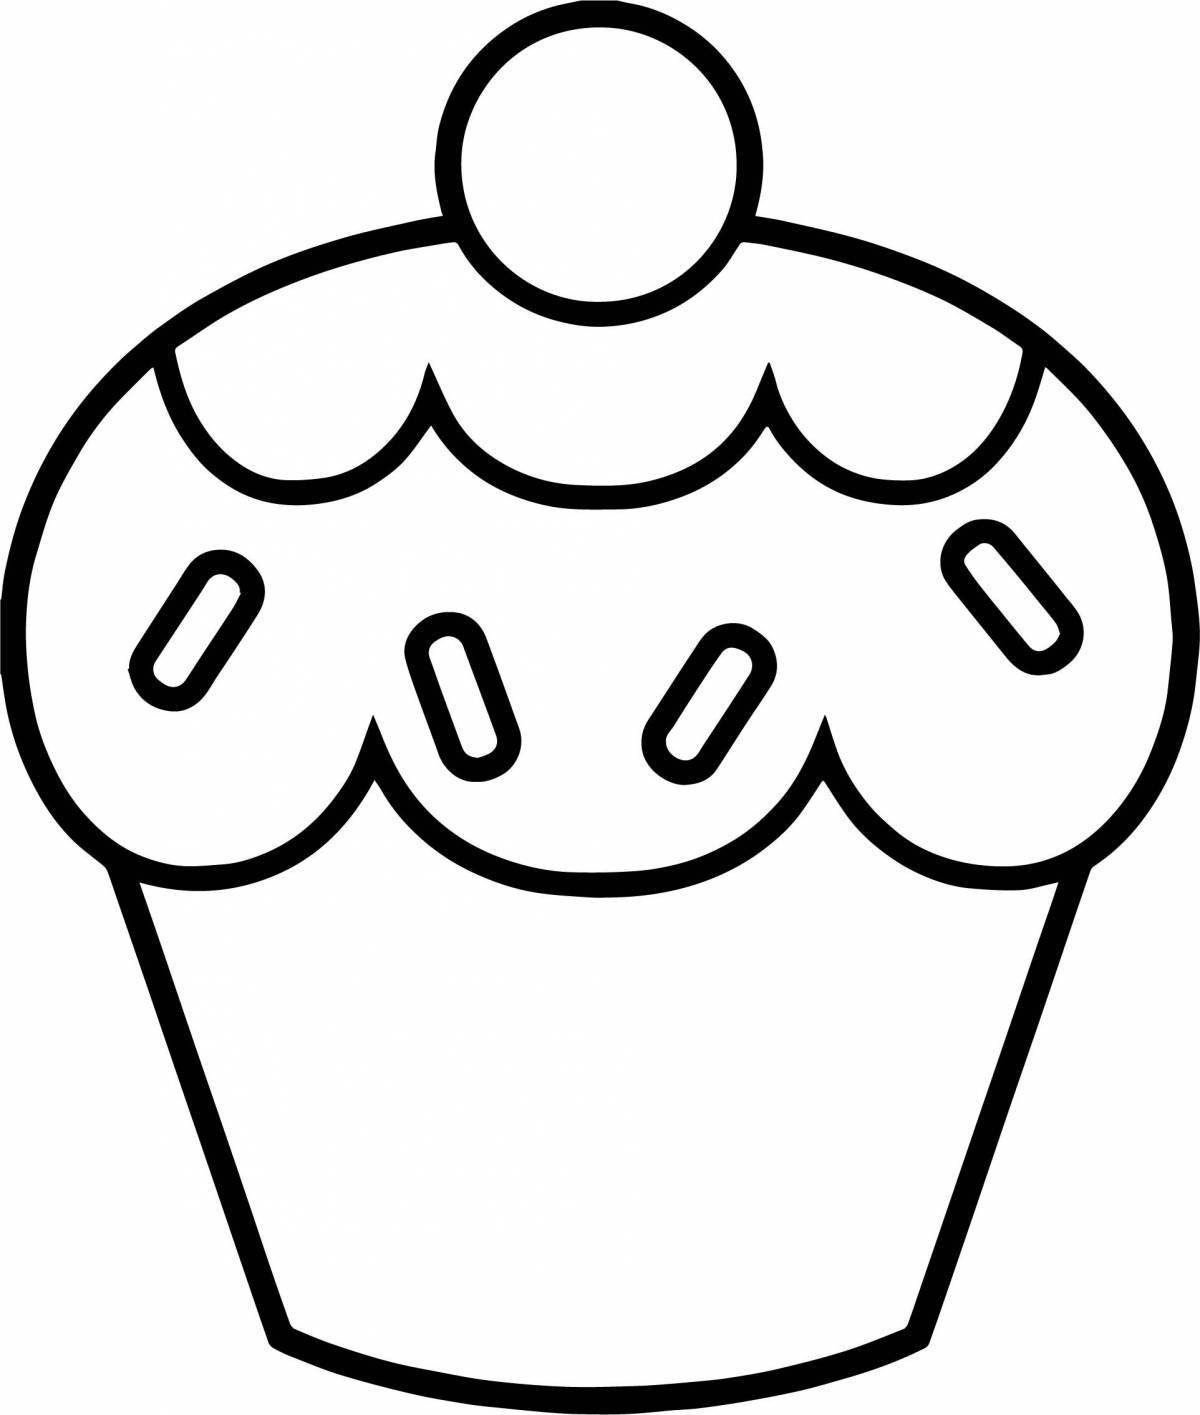 Playful cupcake coloring page for kids